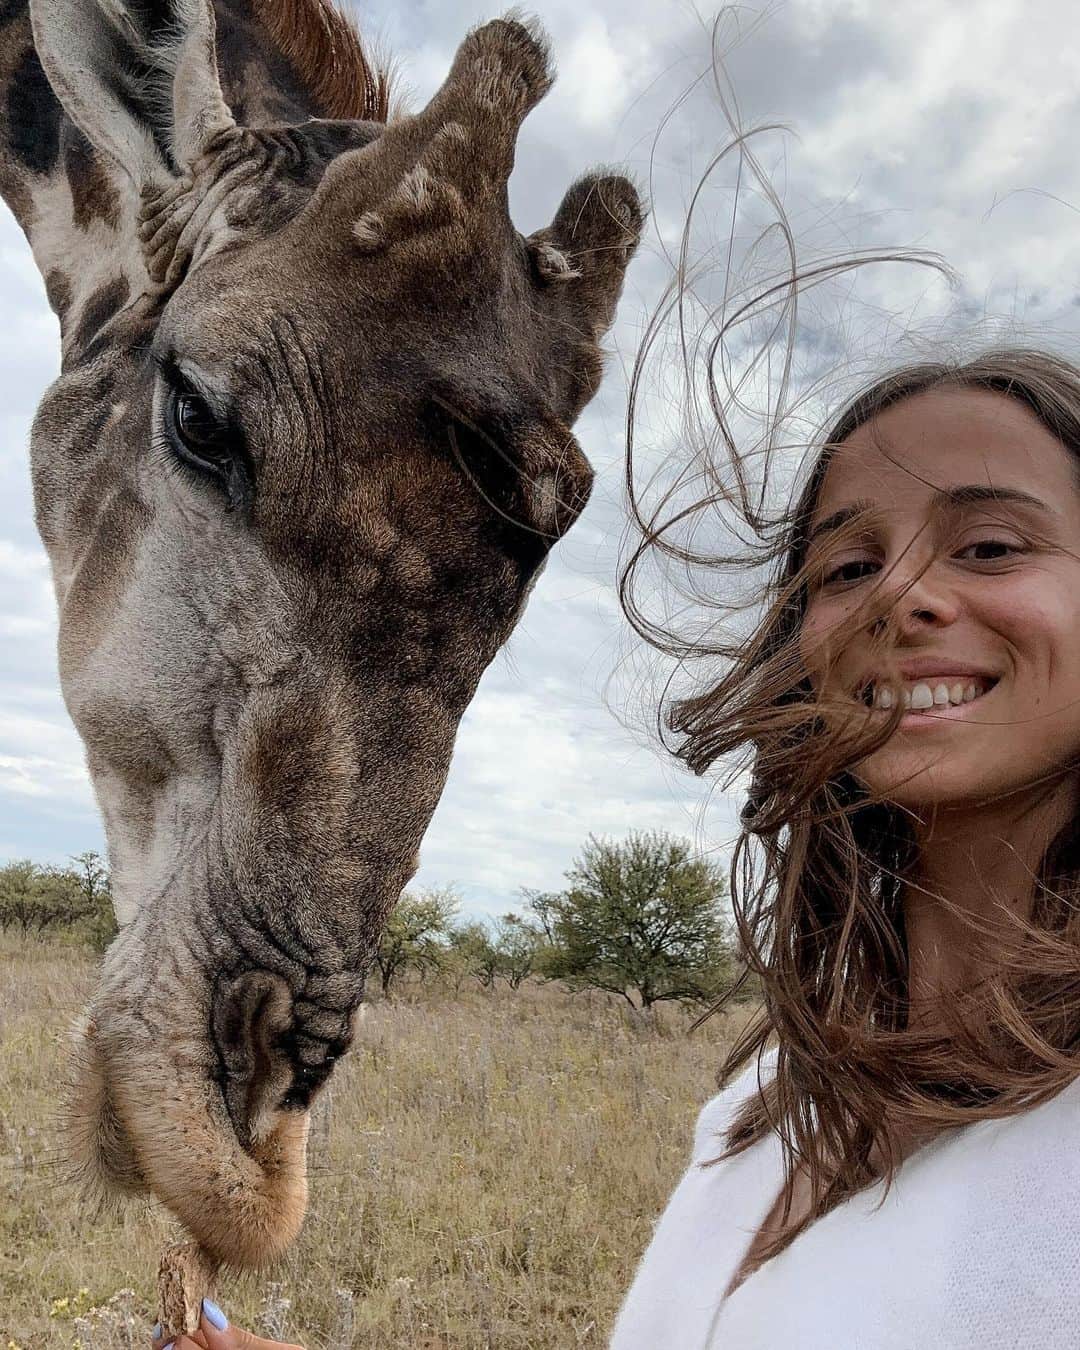 Camille LAUSのインスタグラム：「A day off well spent with Bungee 🦒 He lives in the wild but likes to be fed by humans 🍏 He was following us on our little safari 🦁🦓🦬🦒」